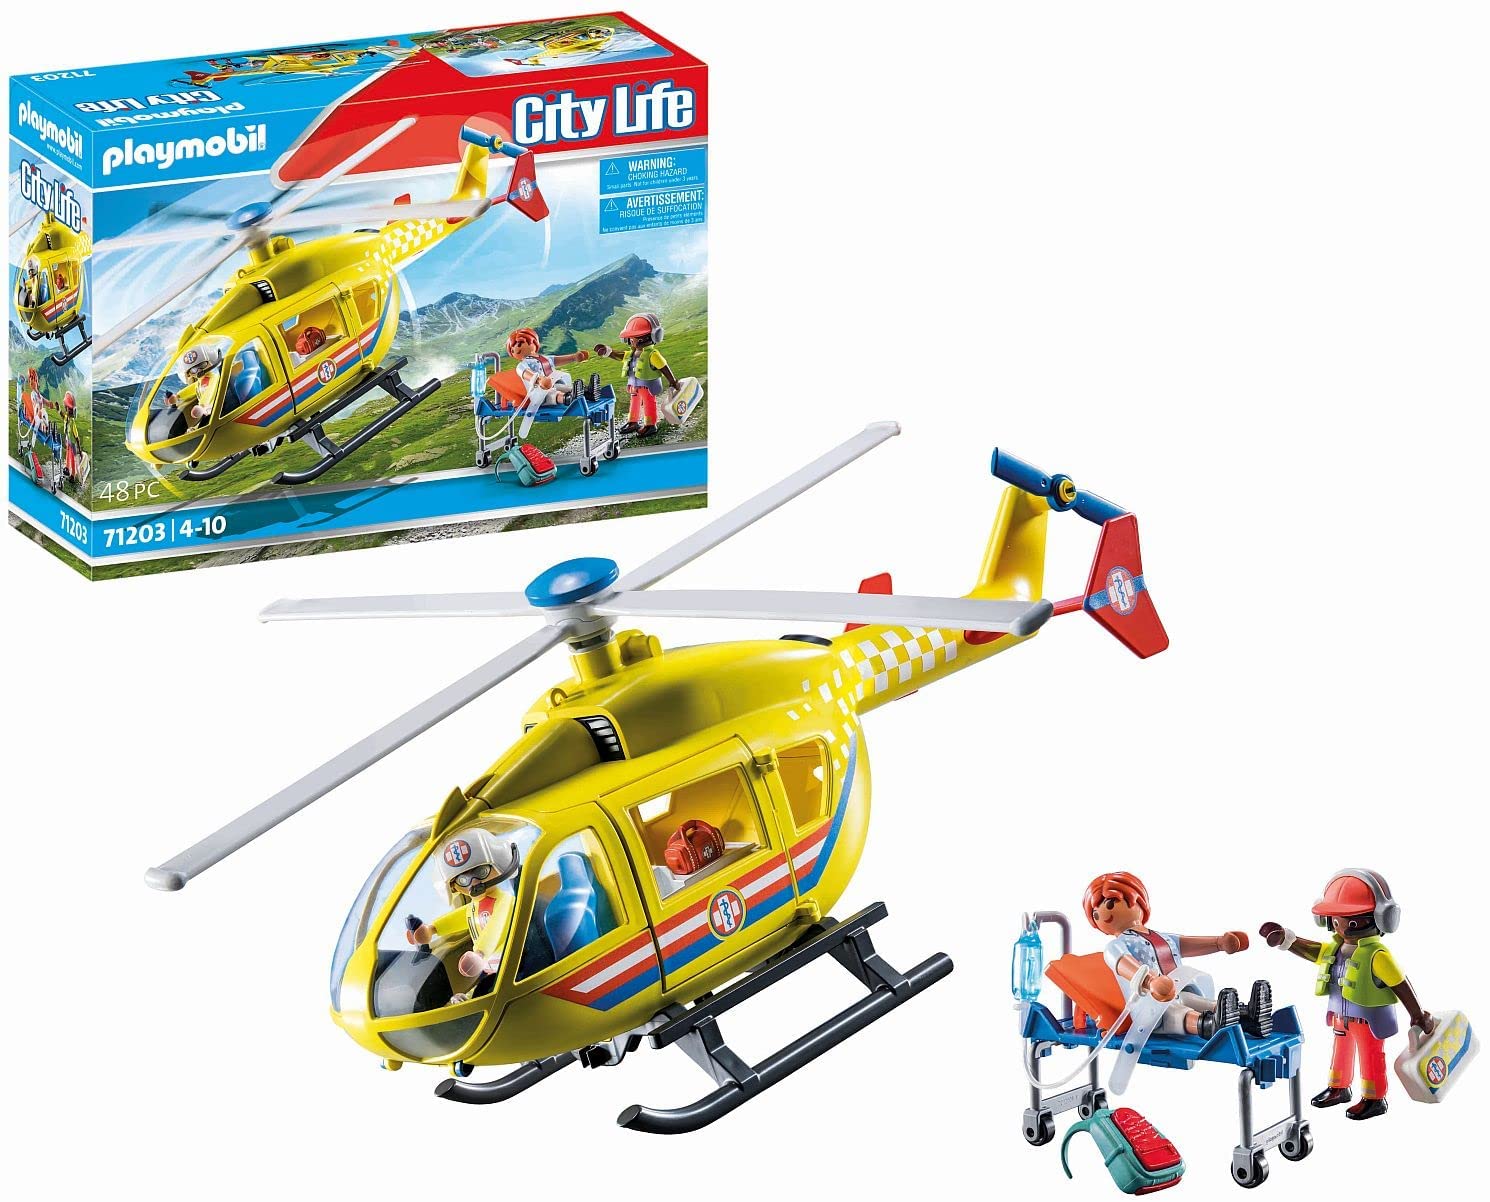 Playmobil City Life 71203 Rescue Helicopter, Toy for Children from 4 years